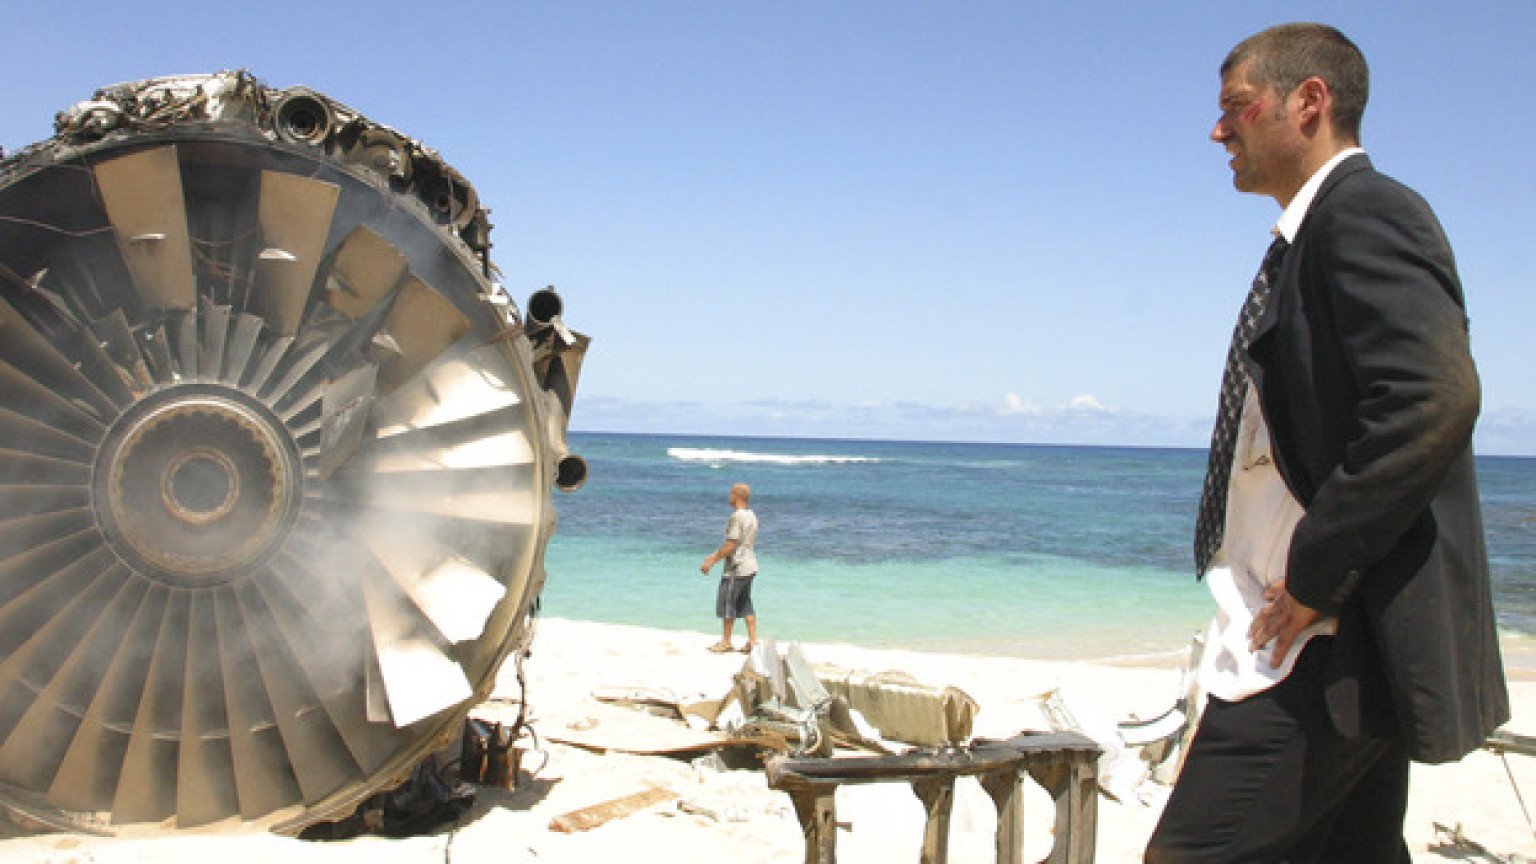 Matthew Fox in a suit, standing next to a plane engine on a beach